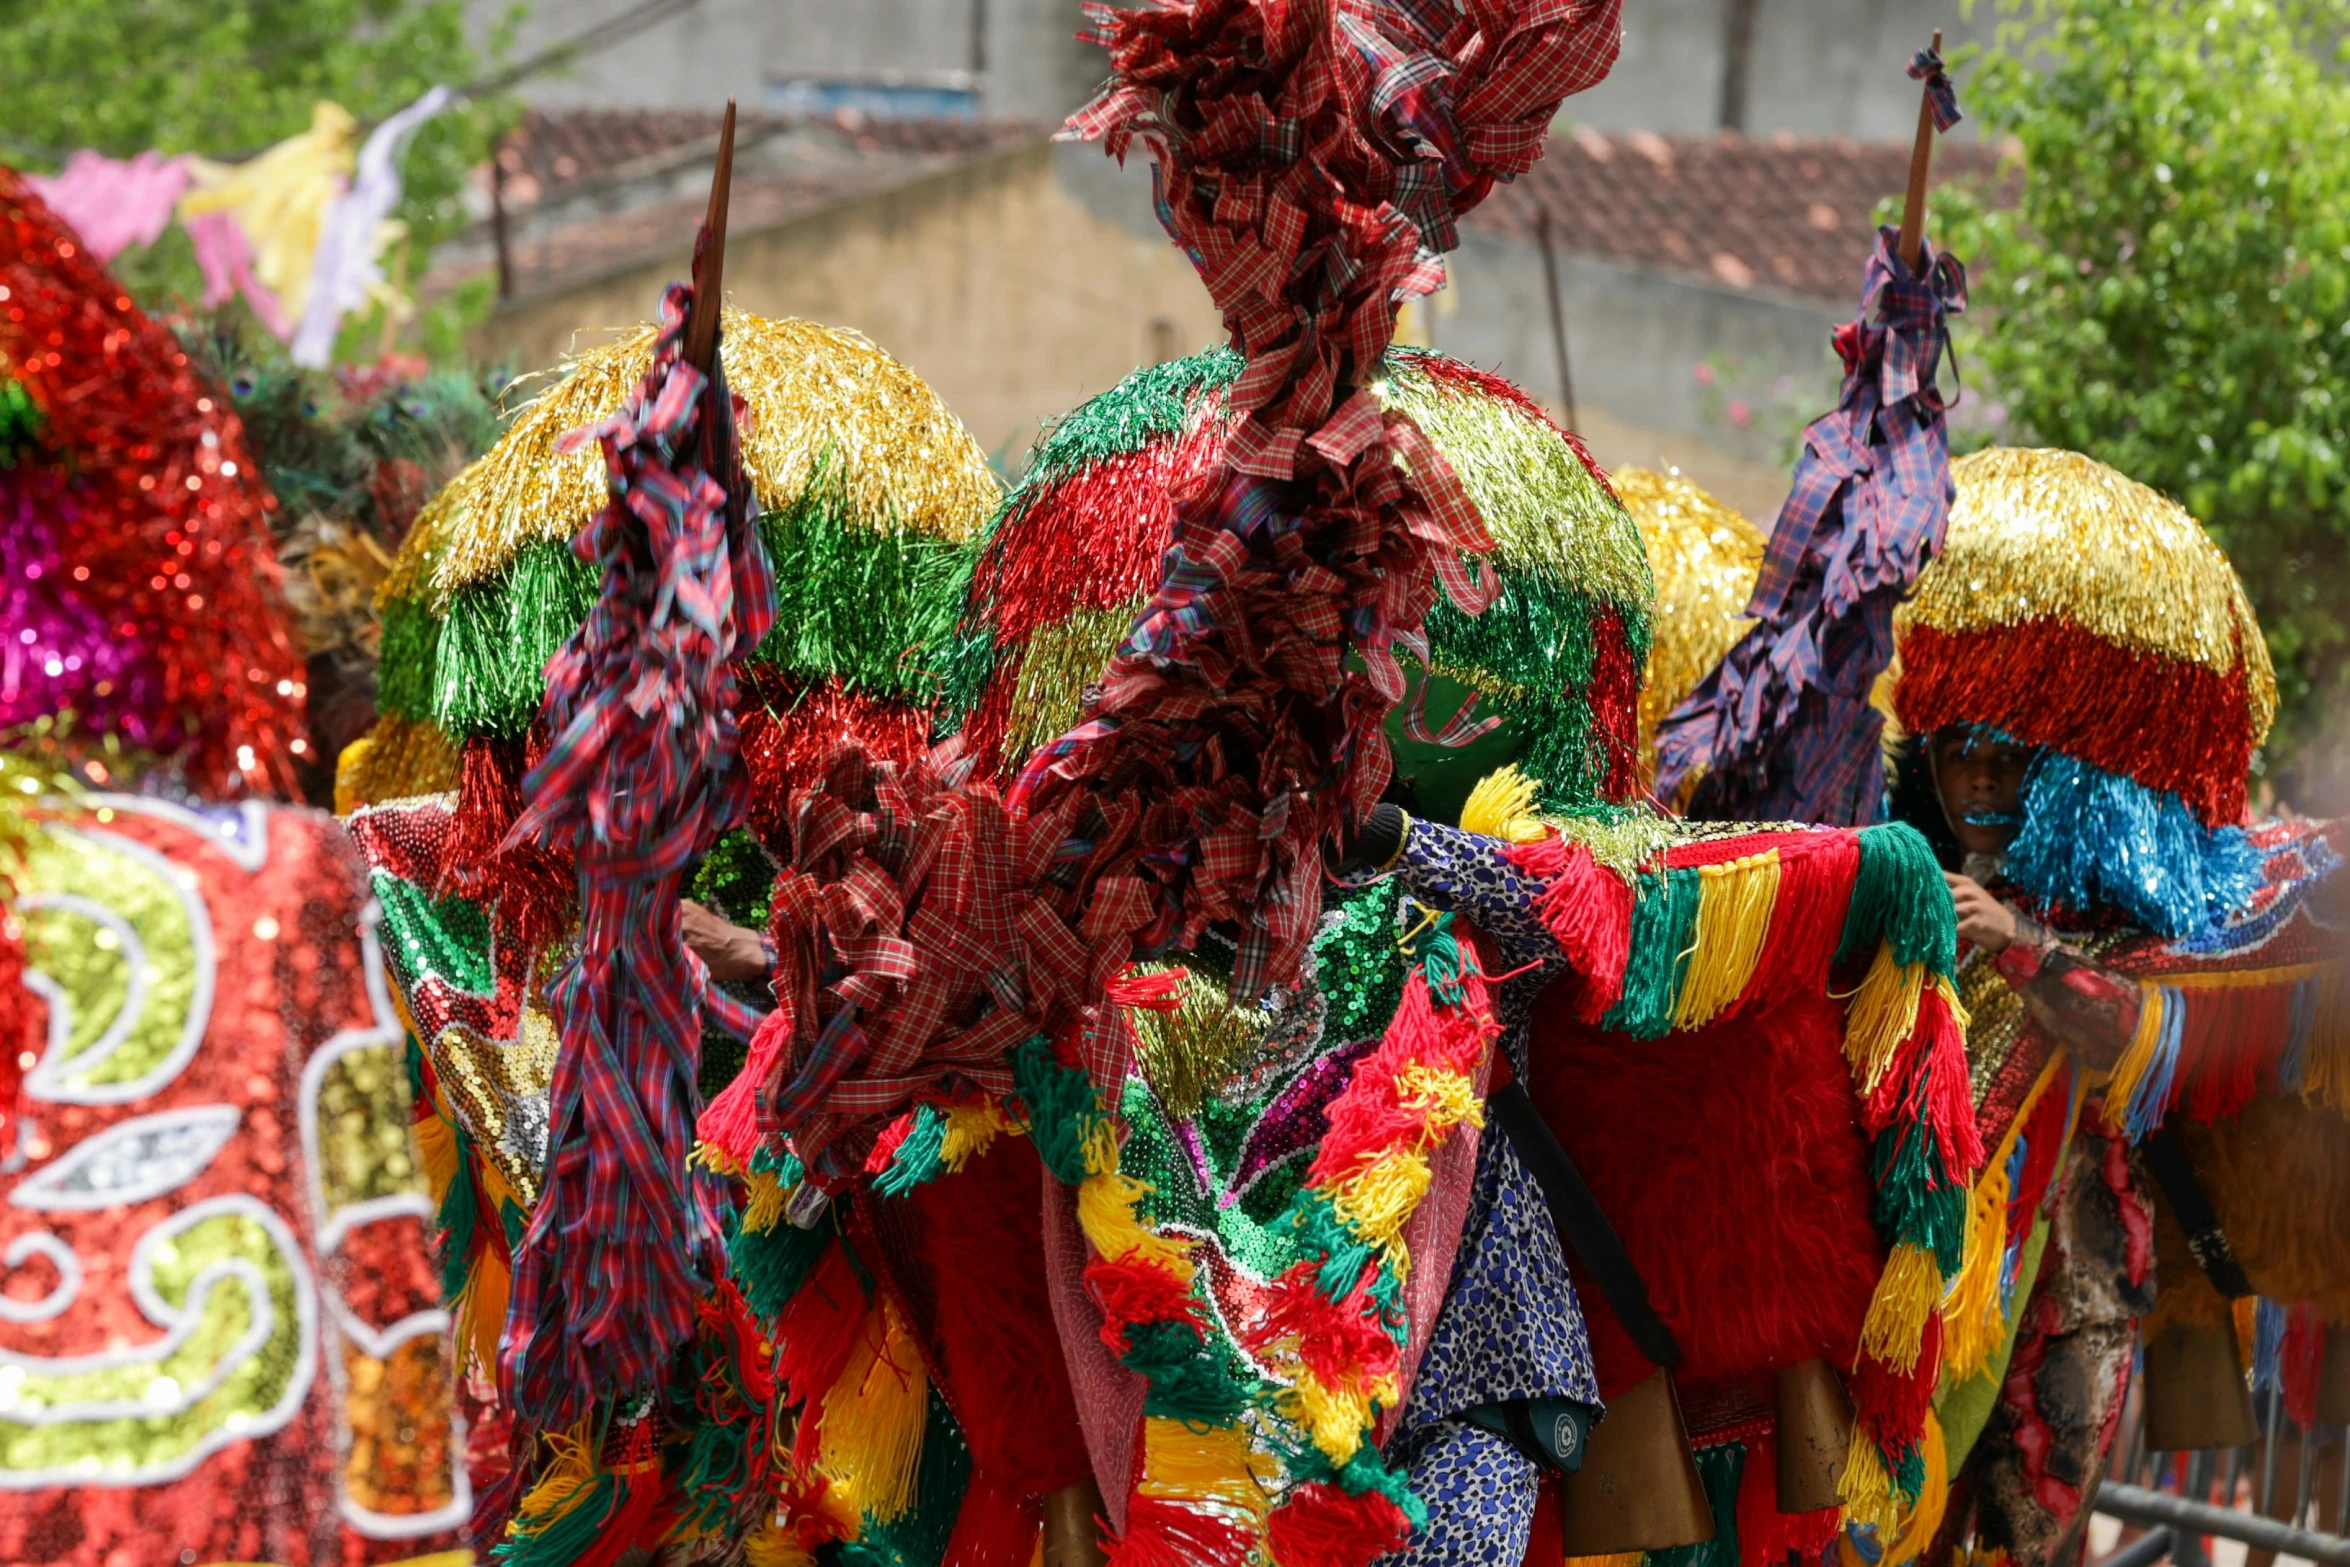 various colored costumes are lined up in rows